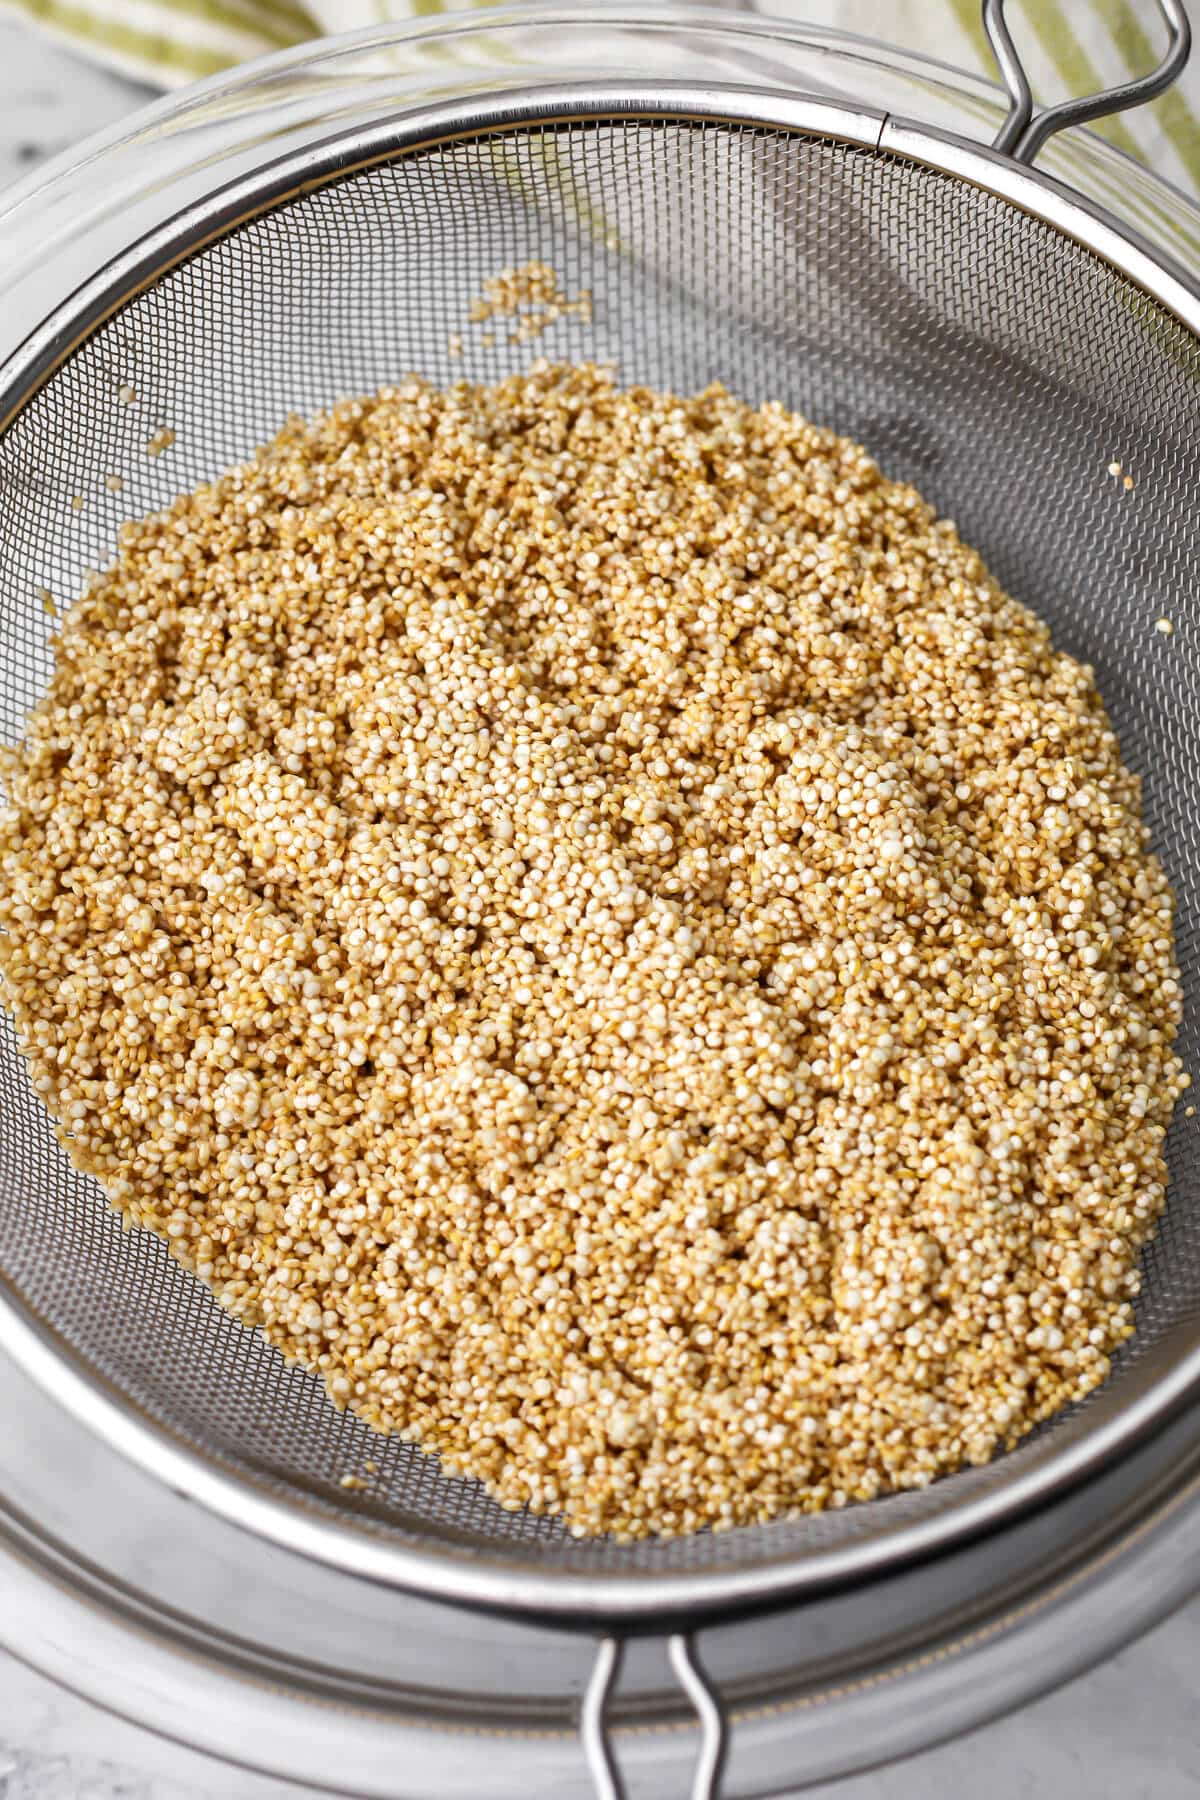 Quinoa that has been washed in a mesh colander.